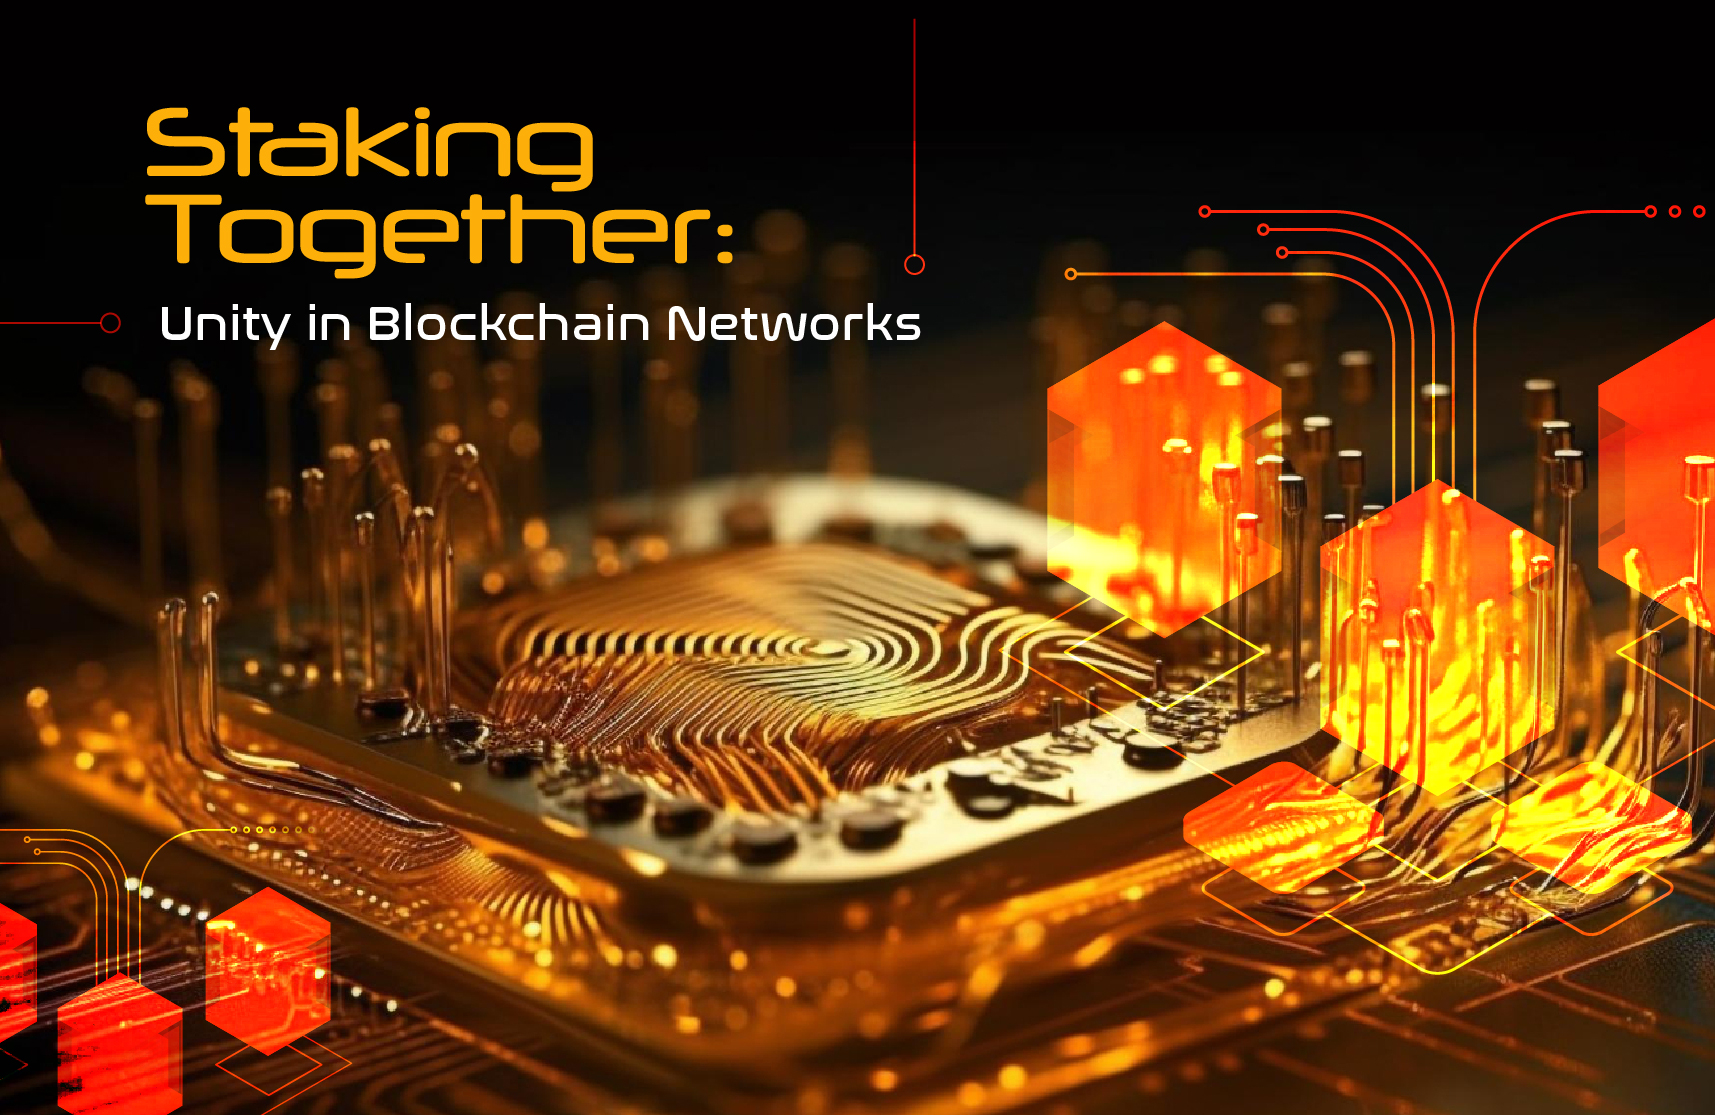 Staking Together: Unity in Blockchain Networks